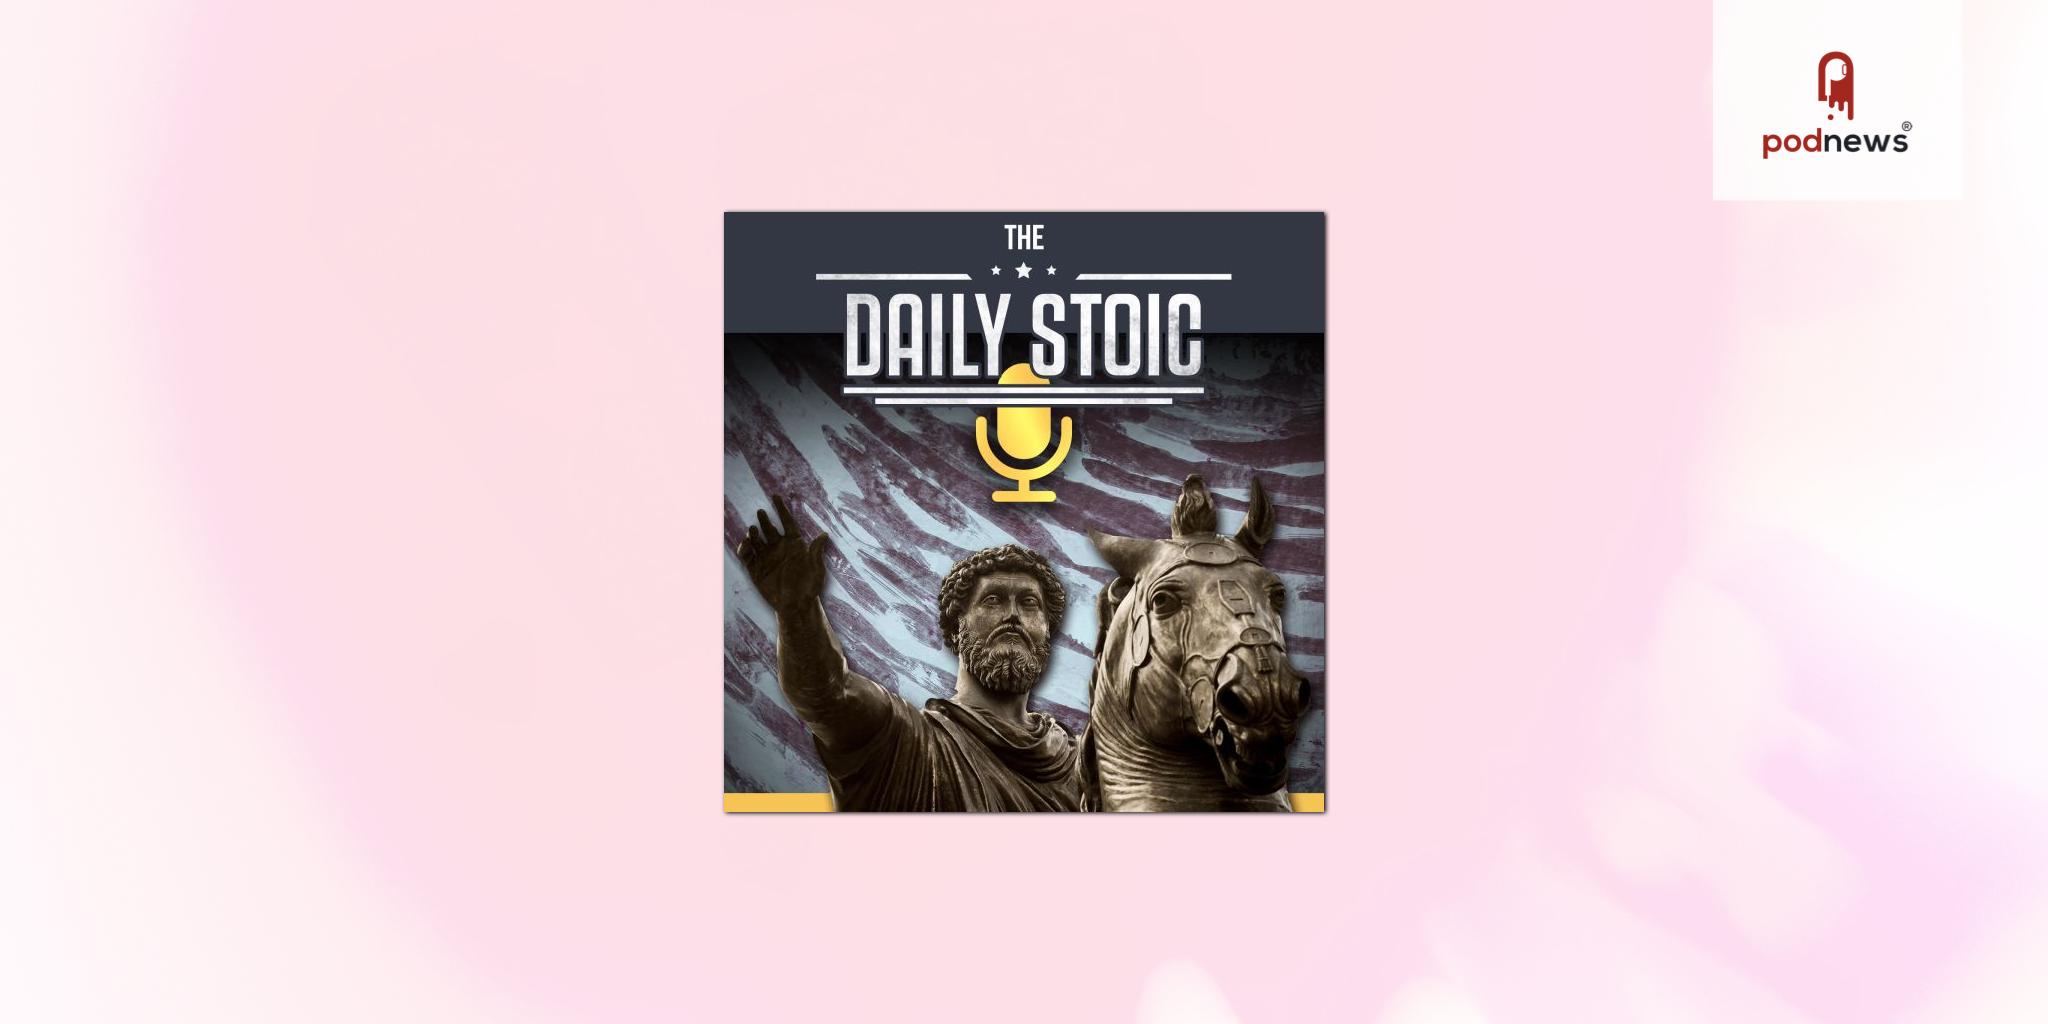 The Daily Stoic podcast host Ryan Holiday, announces new UK and Ireland Tour Dates